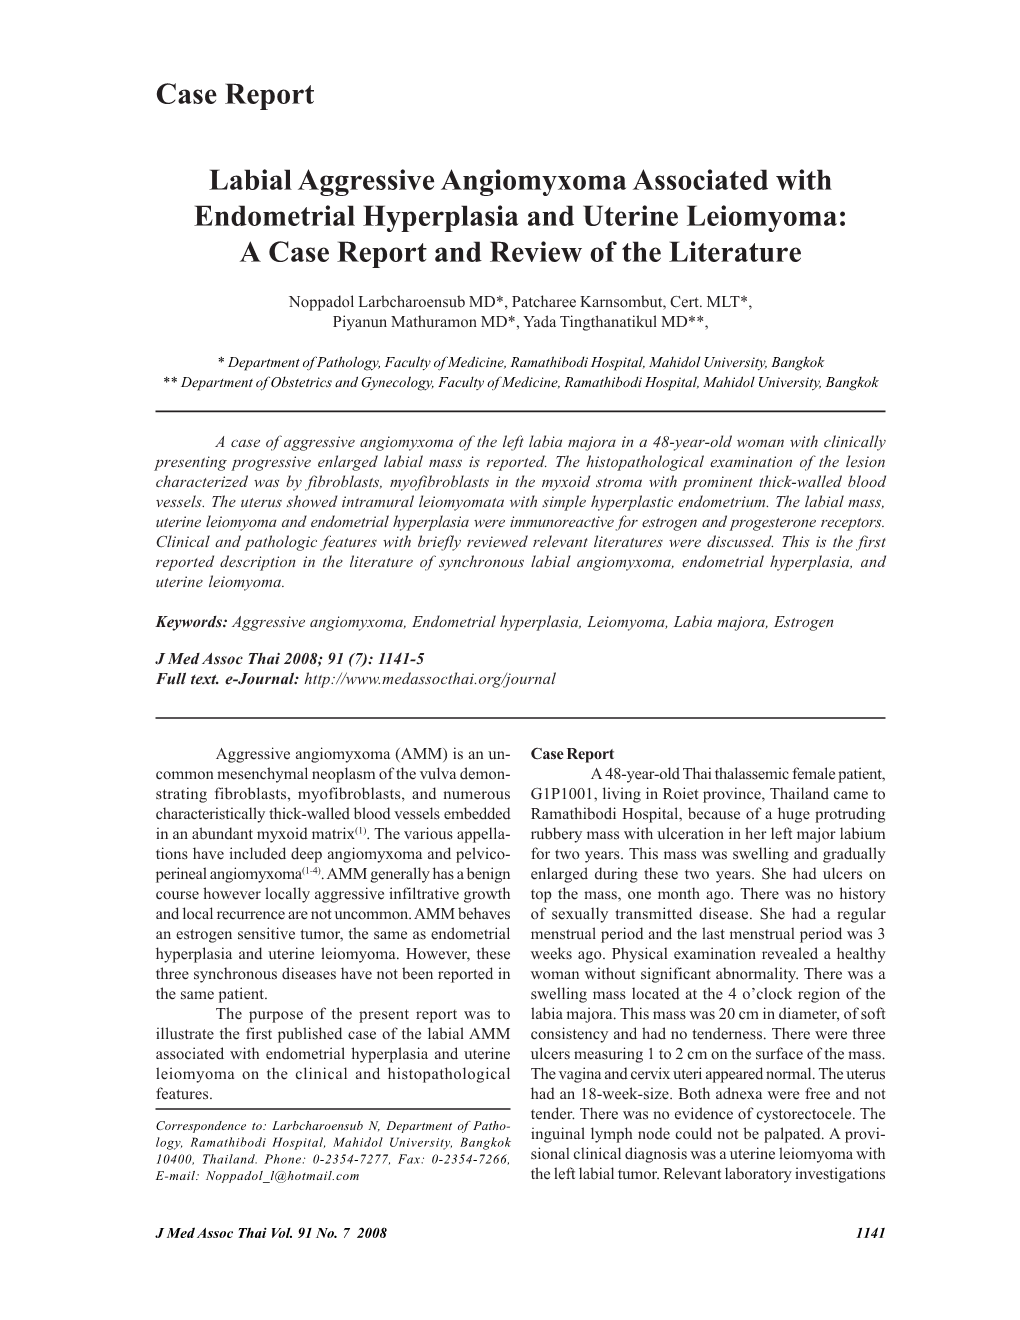 Labial Aggressive Angiomyxoma Associated with Endometrial Hyperplasia and Uterine Leiomyoma: a Case Report and Review of the Literature